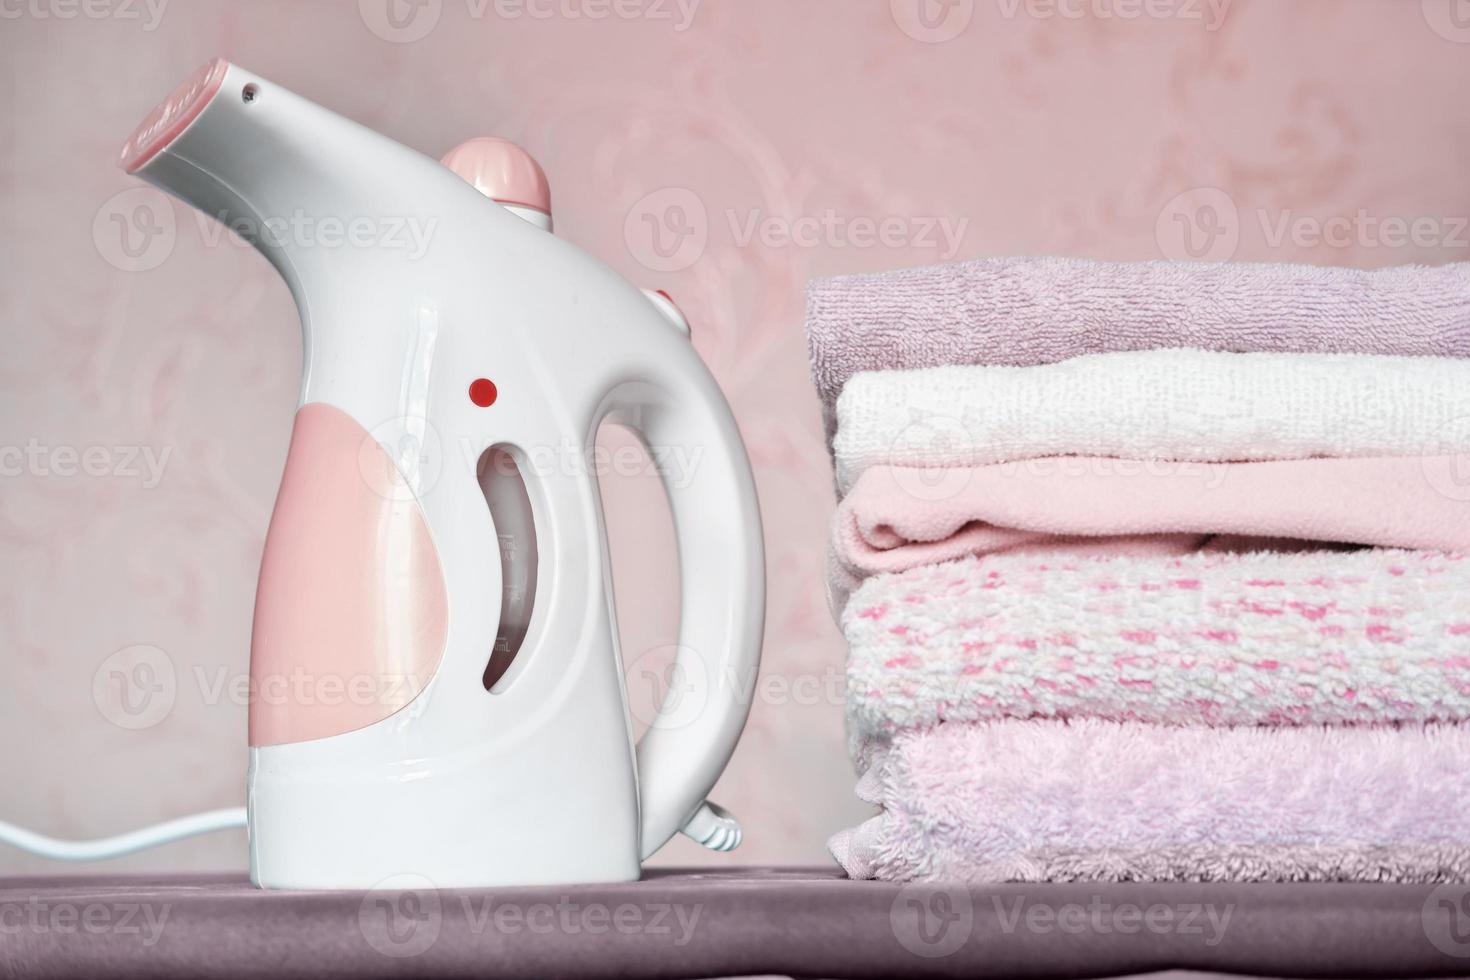 portable electric garment steamer and pile of folded towels on ironing board. housekeeping and householding, chores concept. photo